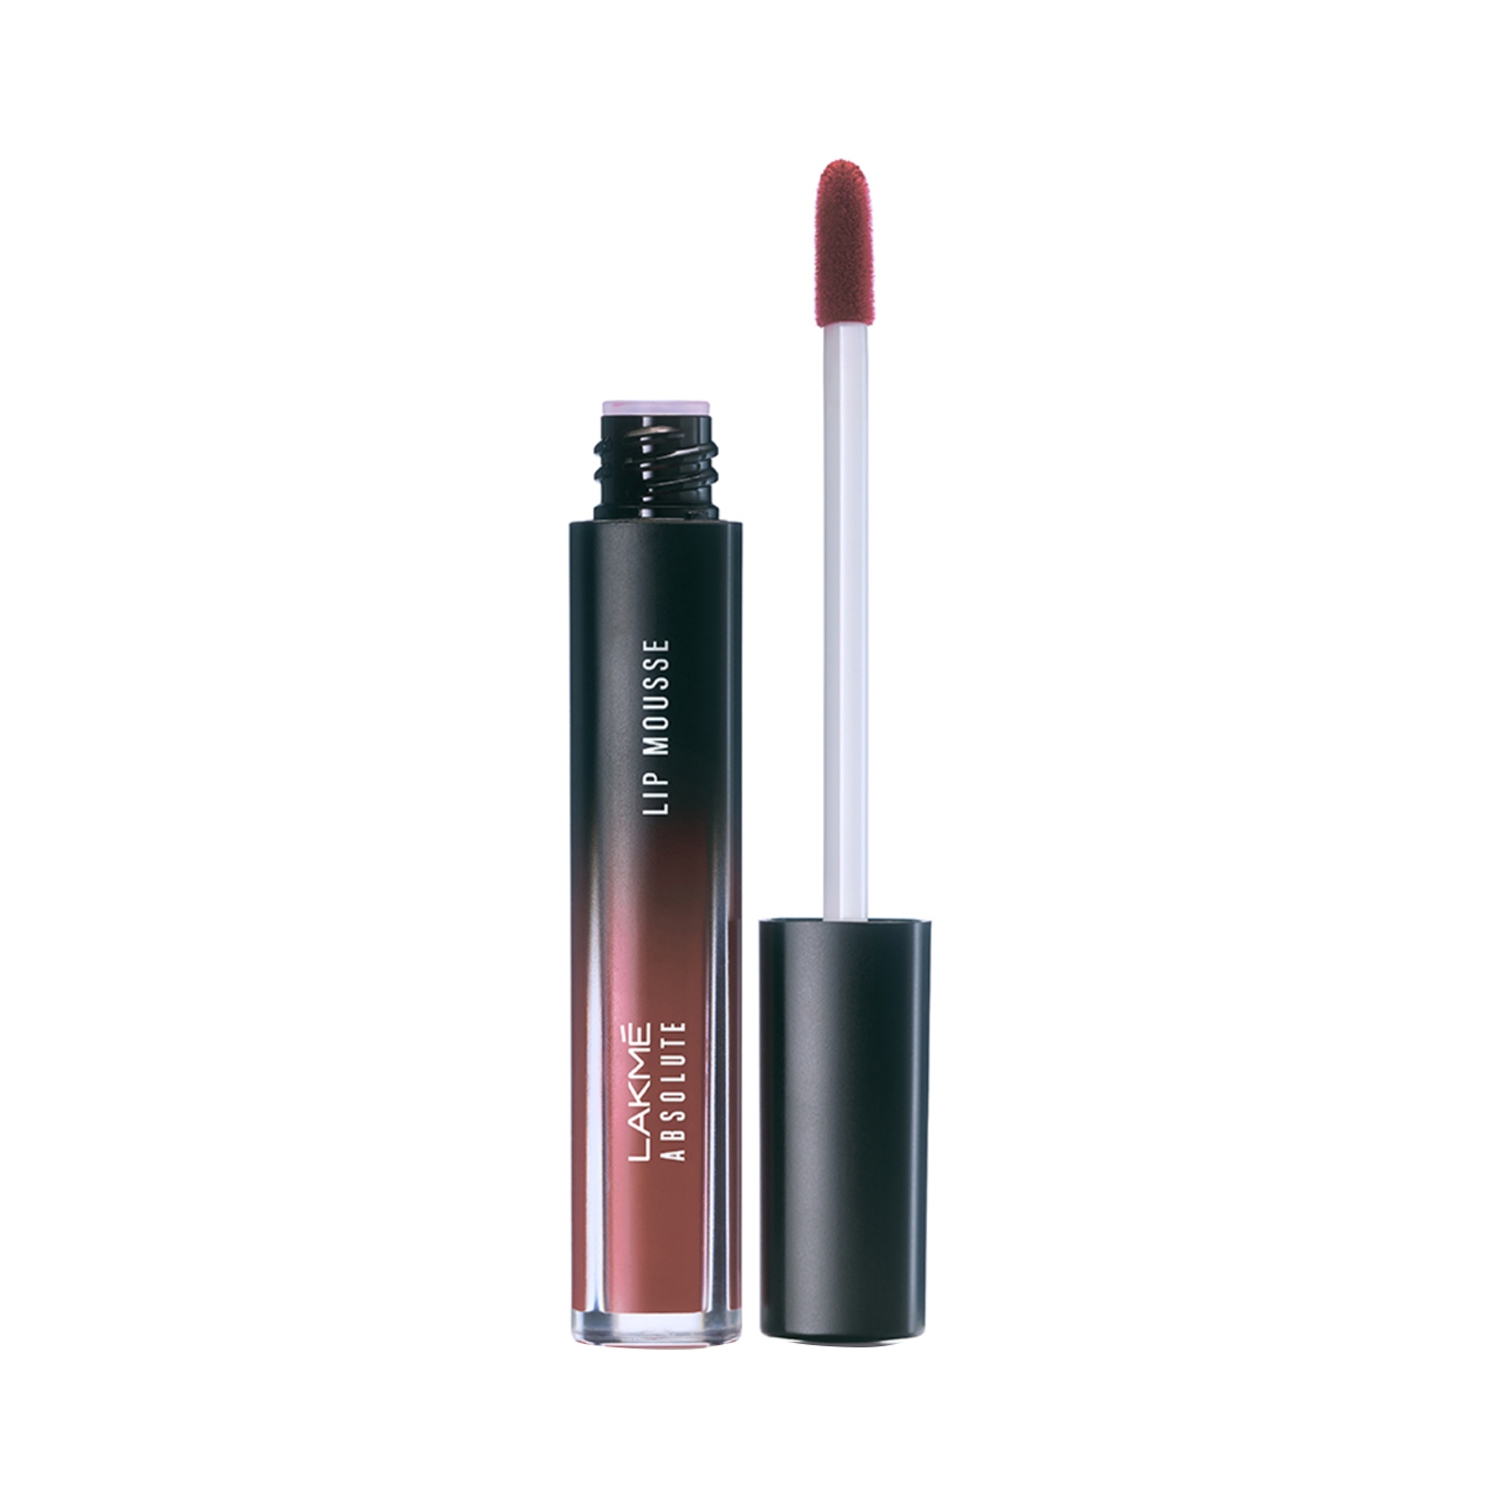 Lakme | Lakme Absolute Sheer Lip Mousse - 302 Cocoa Sin (4.6g)